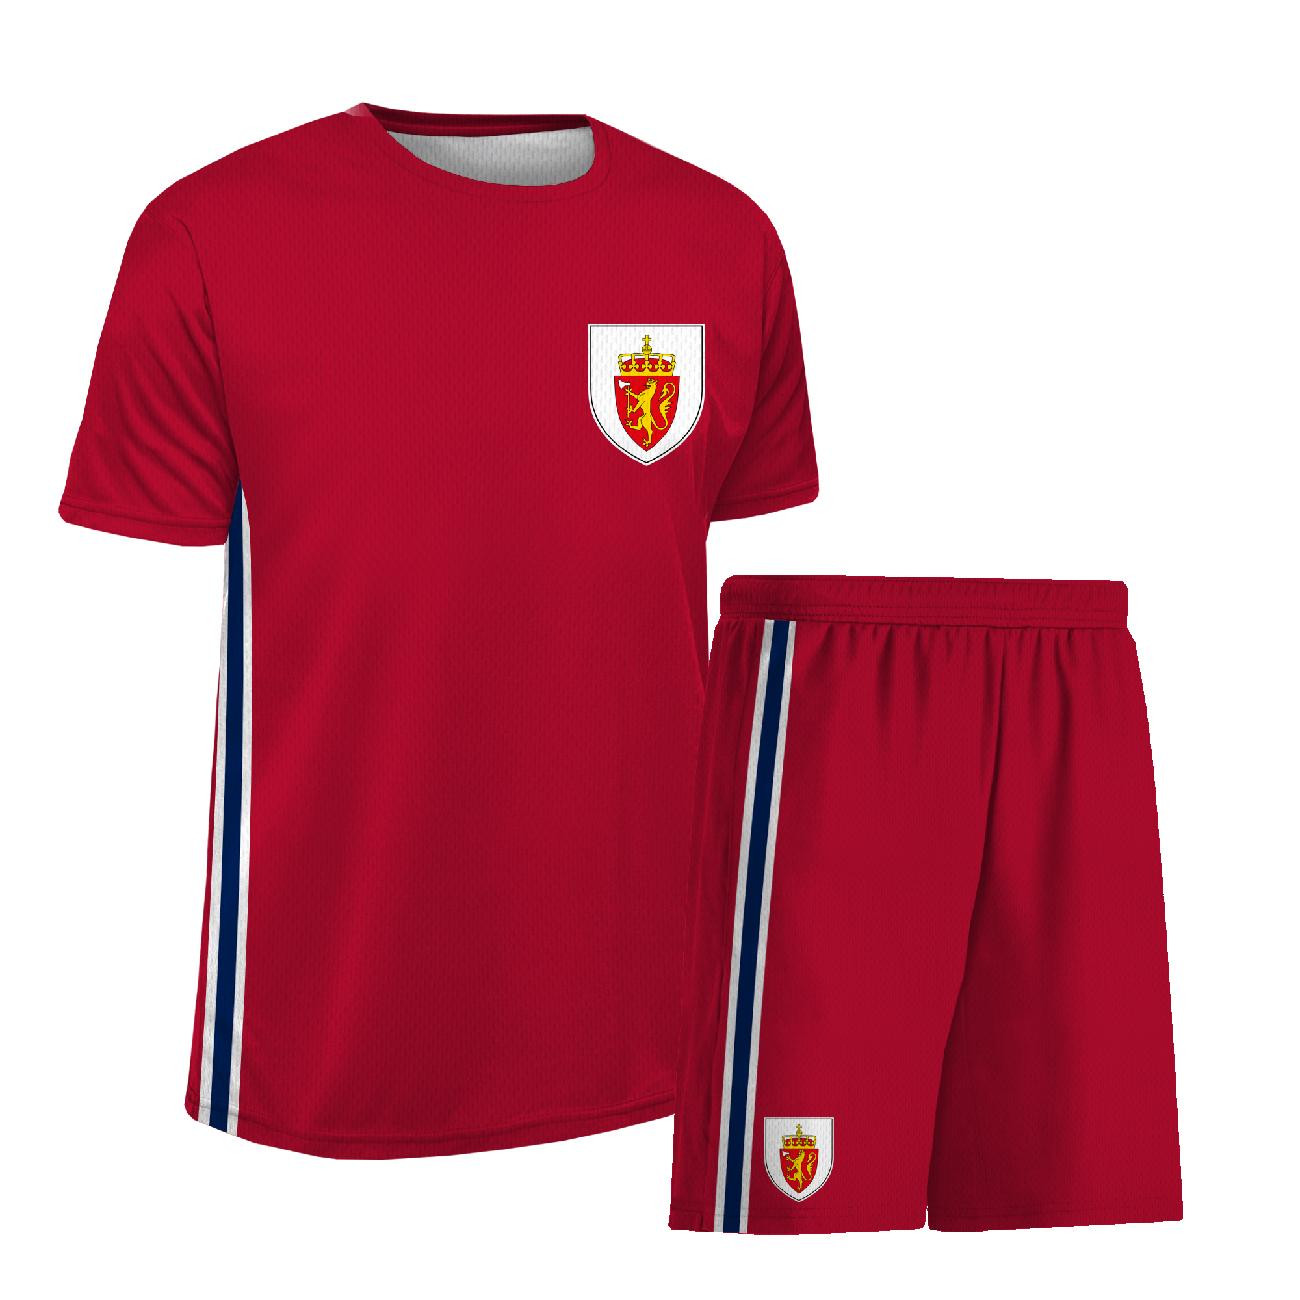 Children's sport outfit "PELE" - NORWAY - sewing set